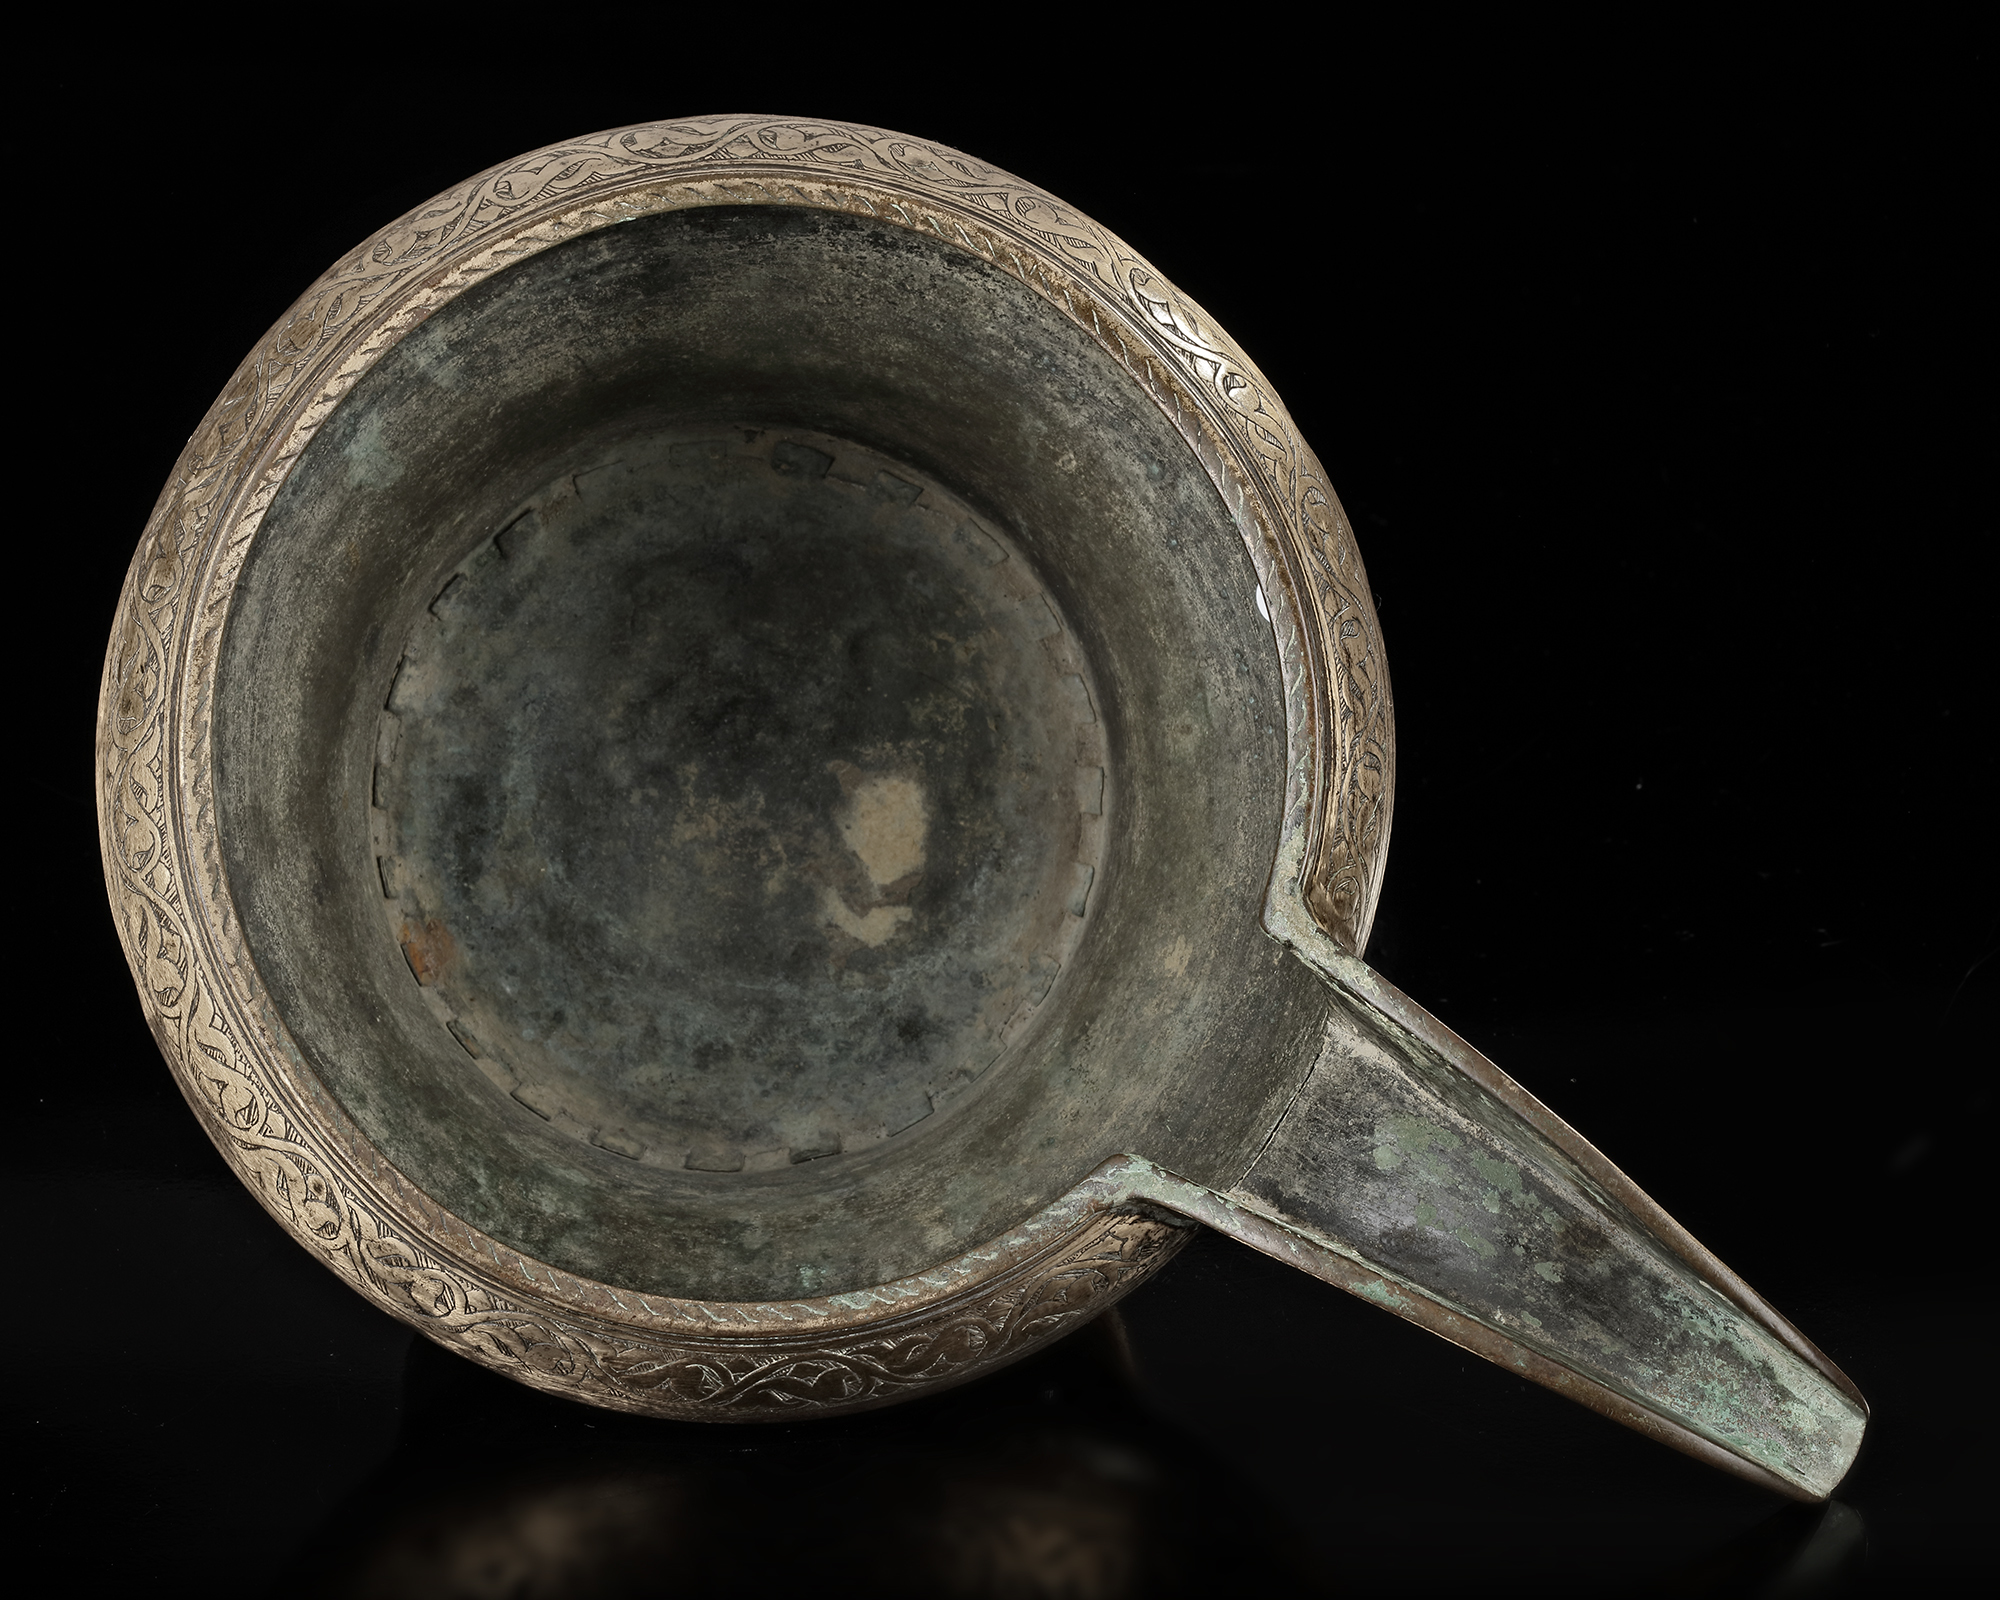 AN ENGRAVED SAFAVID TINNED COPPER SPOUTED POURING BOWL, PERSIA, 17TH CENTURY - Image 2 of 4